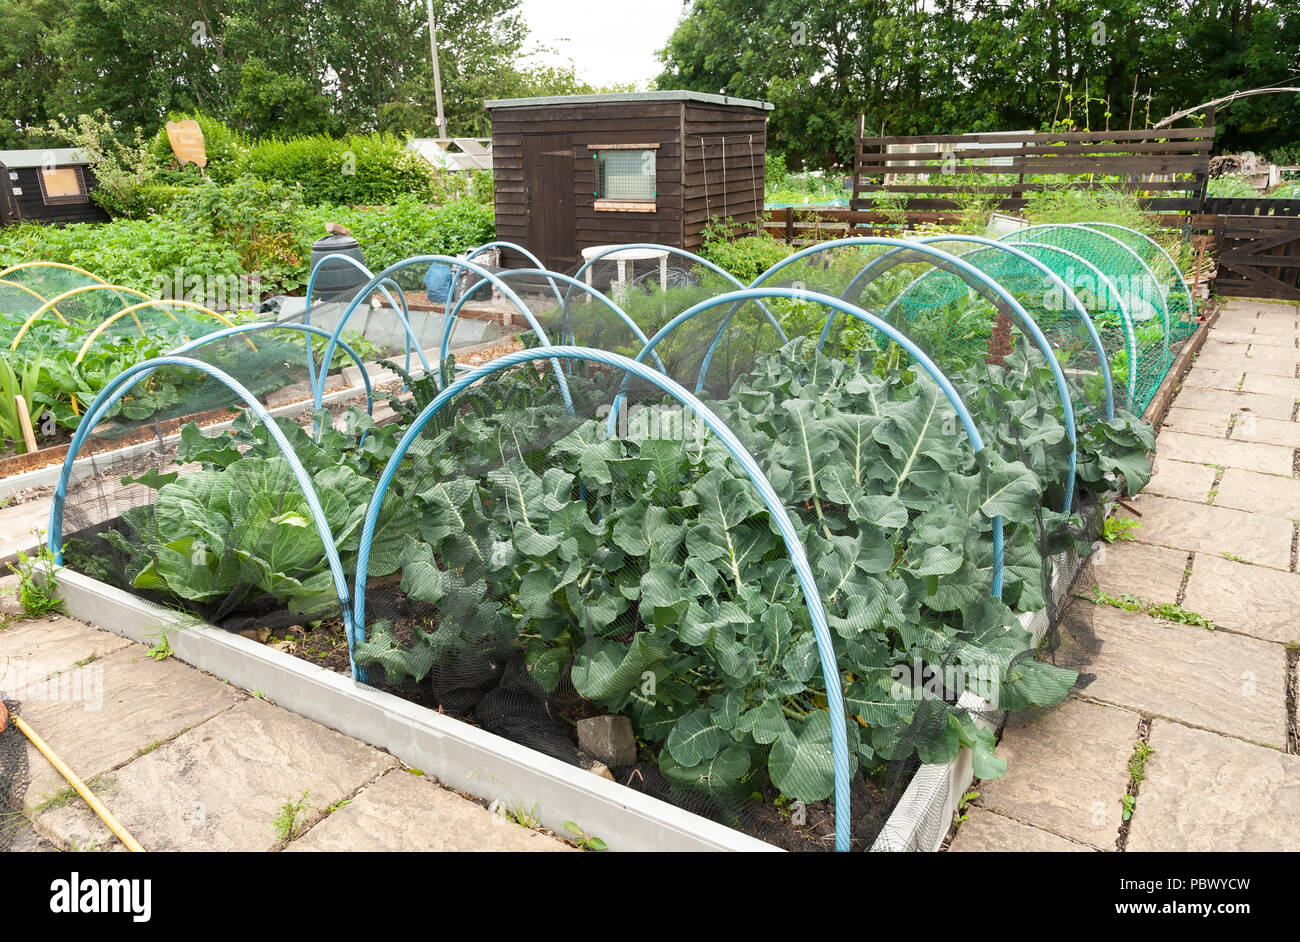 Brassicas protected under a net on an orderly garden plot. Stock Photo